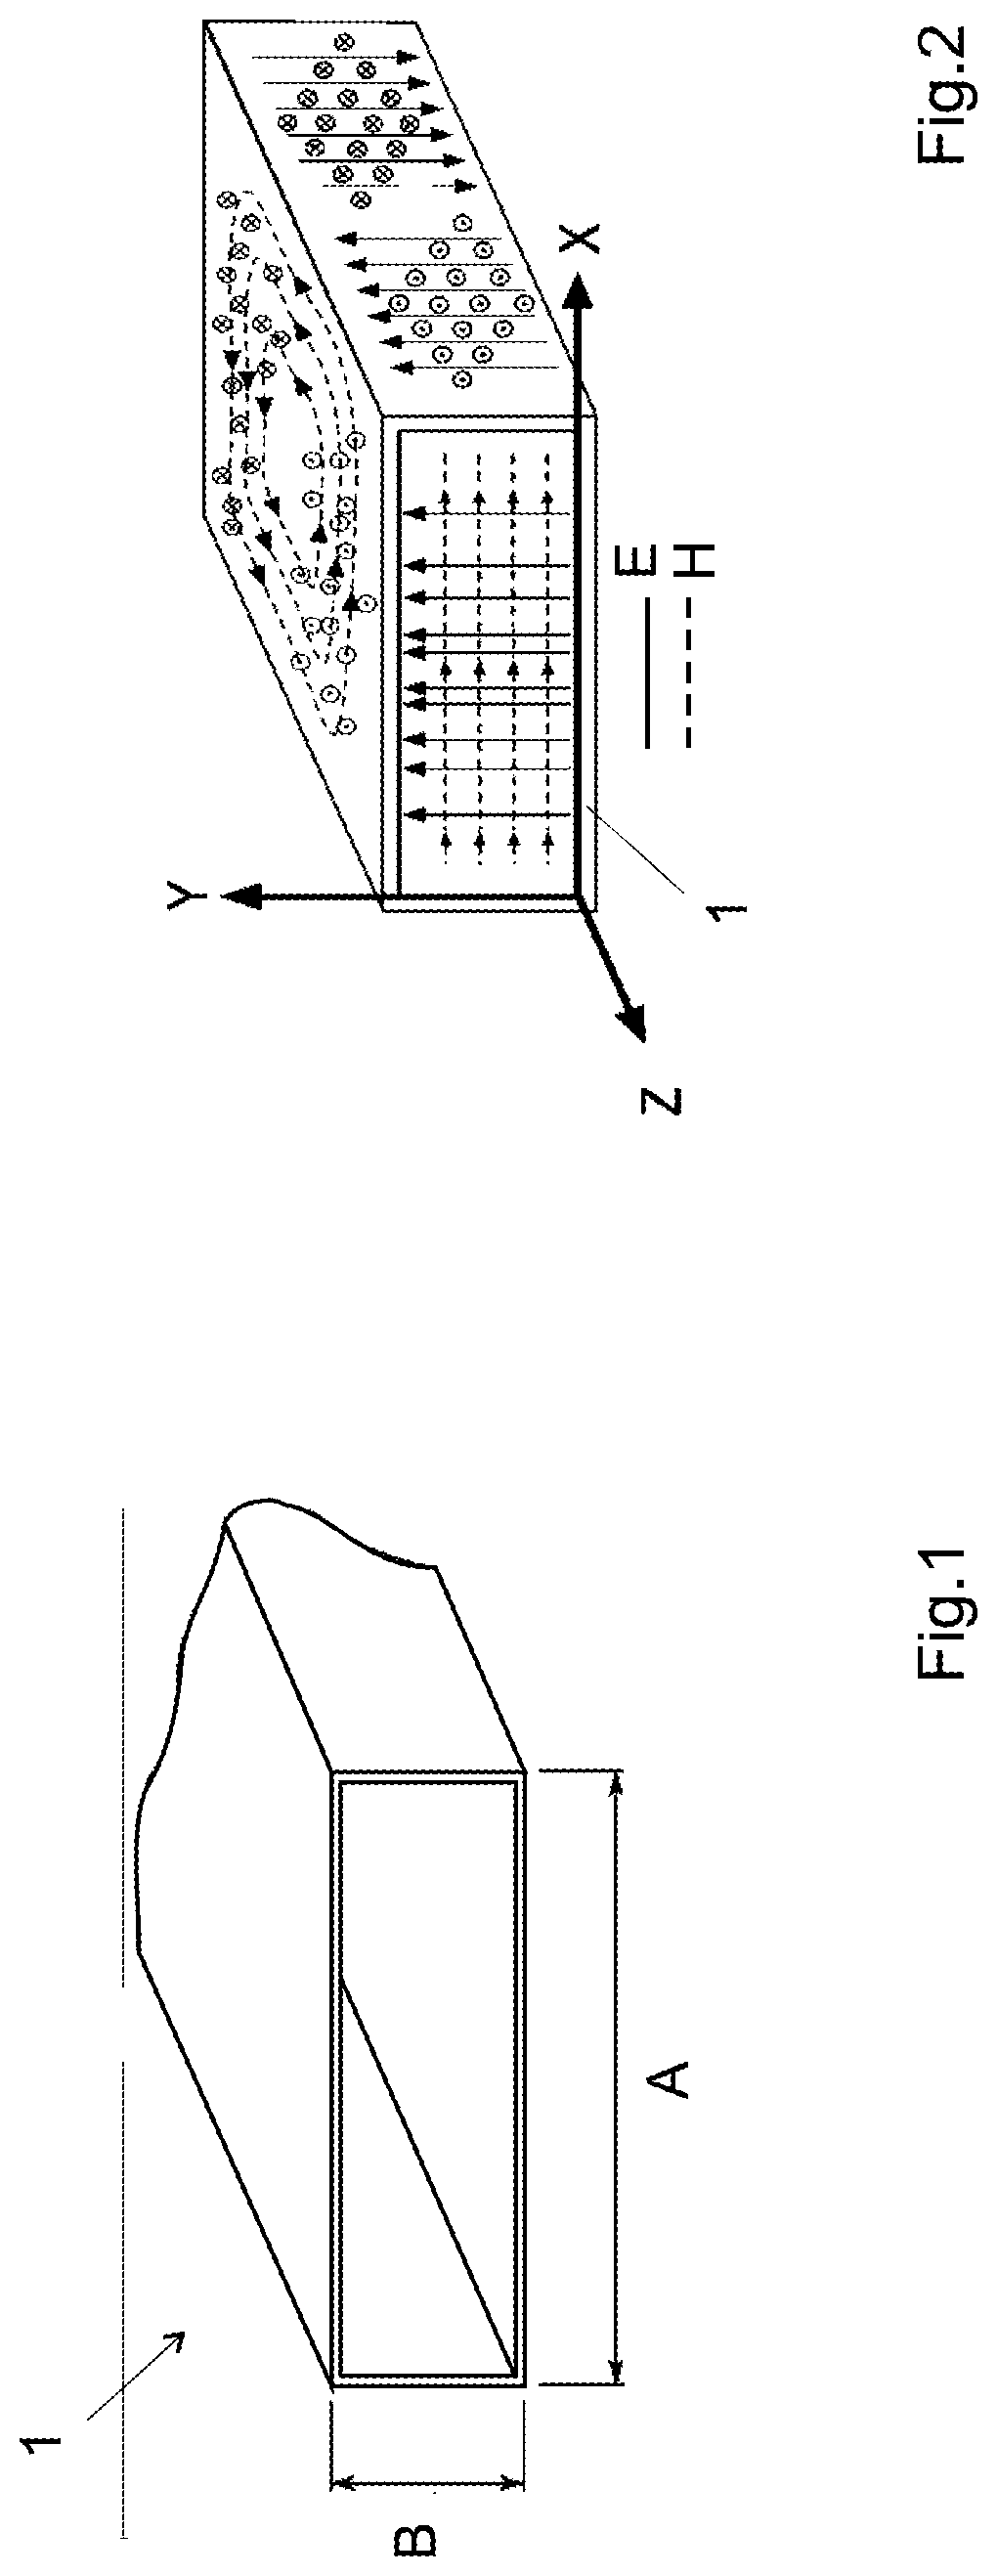 A method of additive manufacture of a waveguide as well as waveguide devices manufactured according to this method